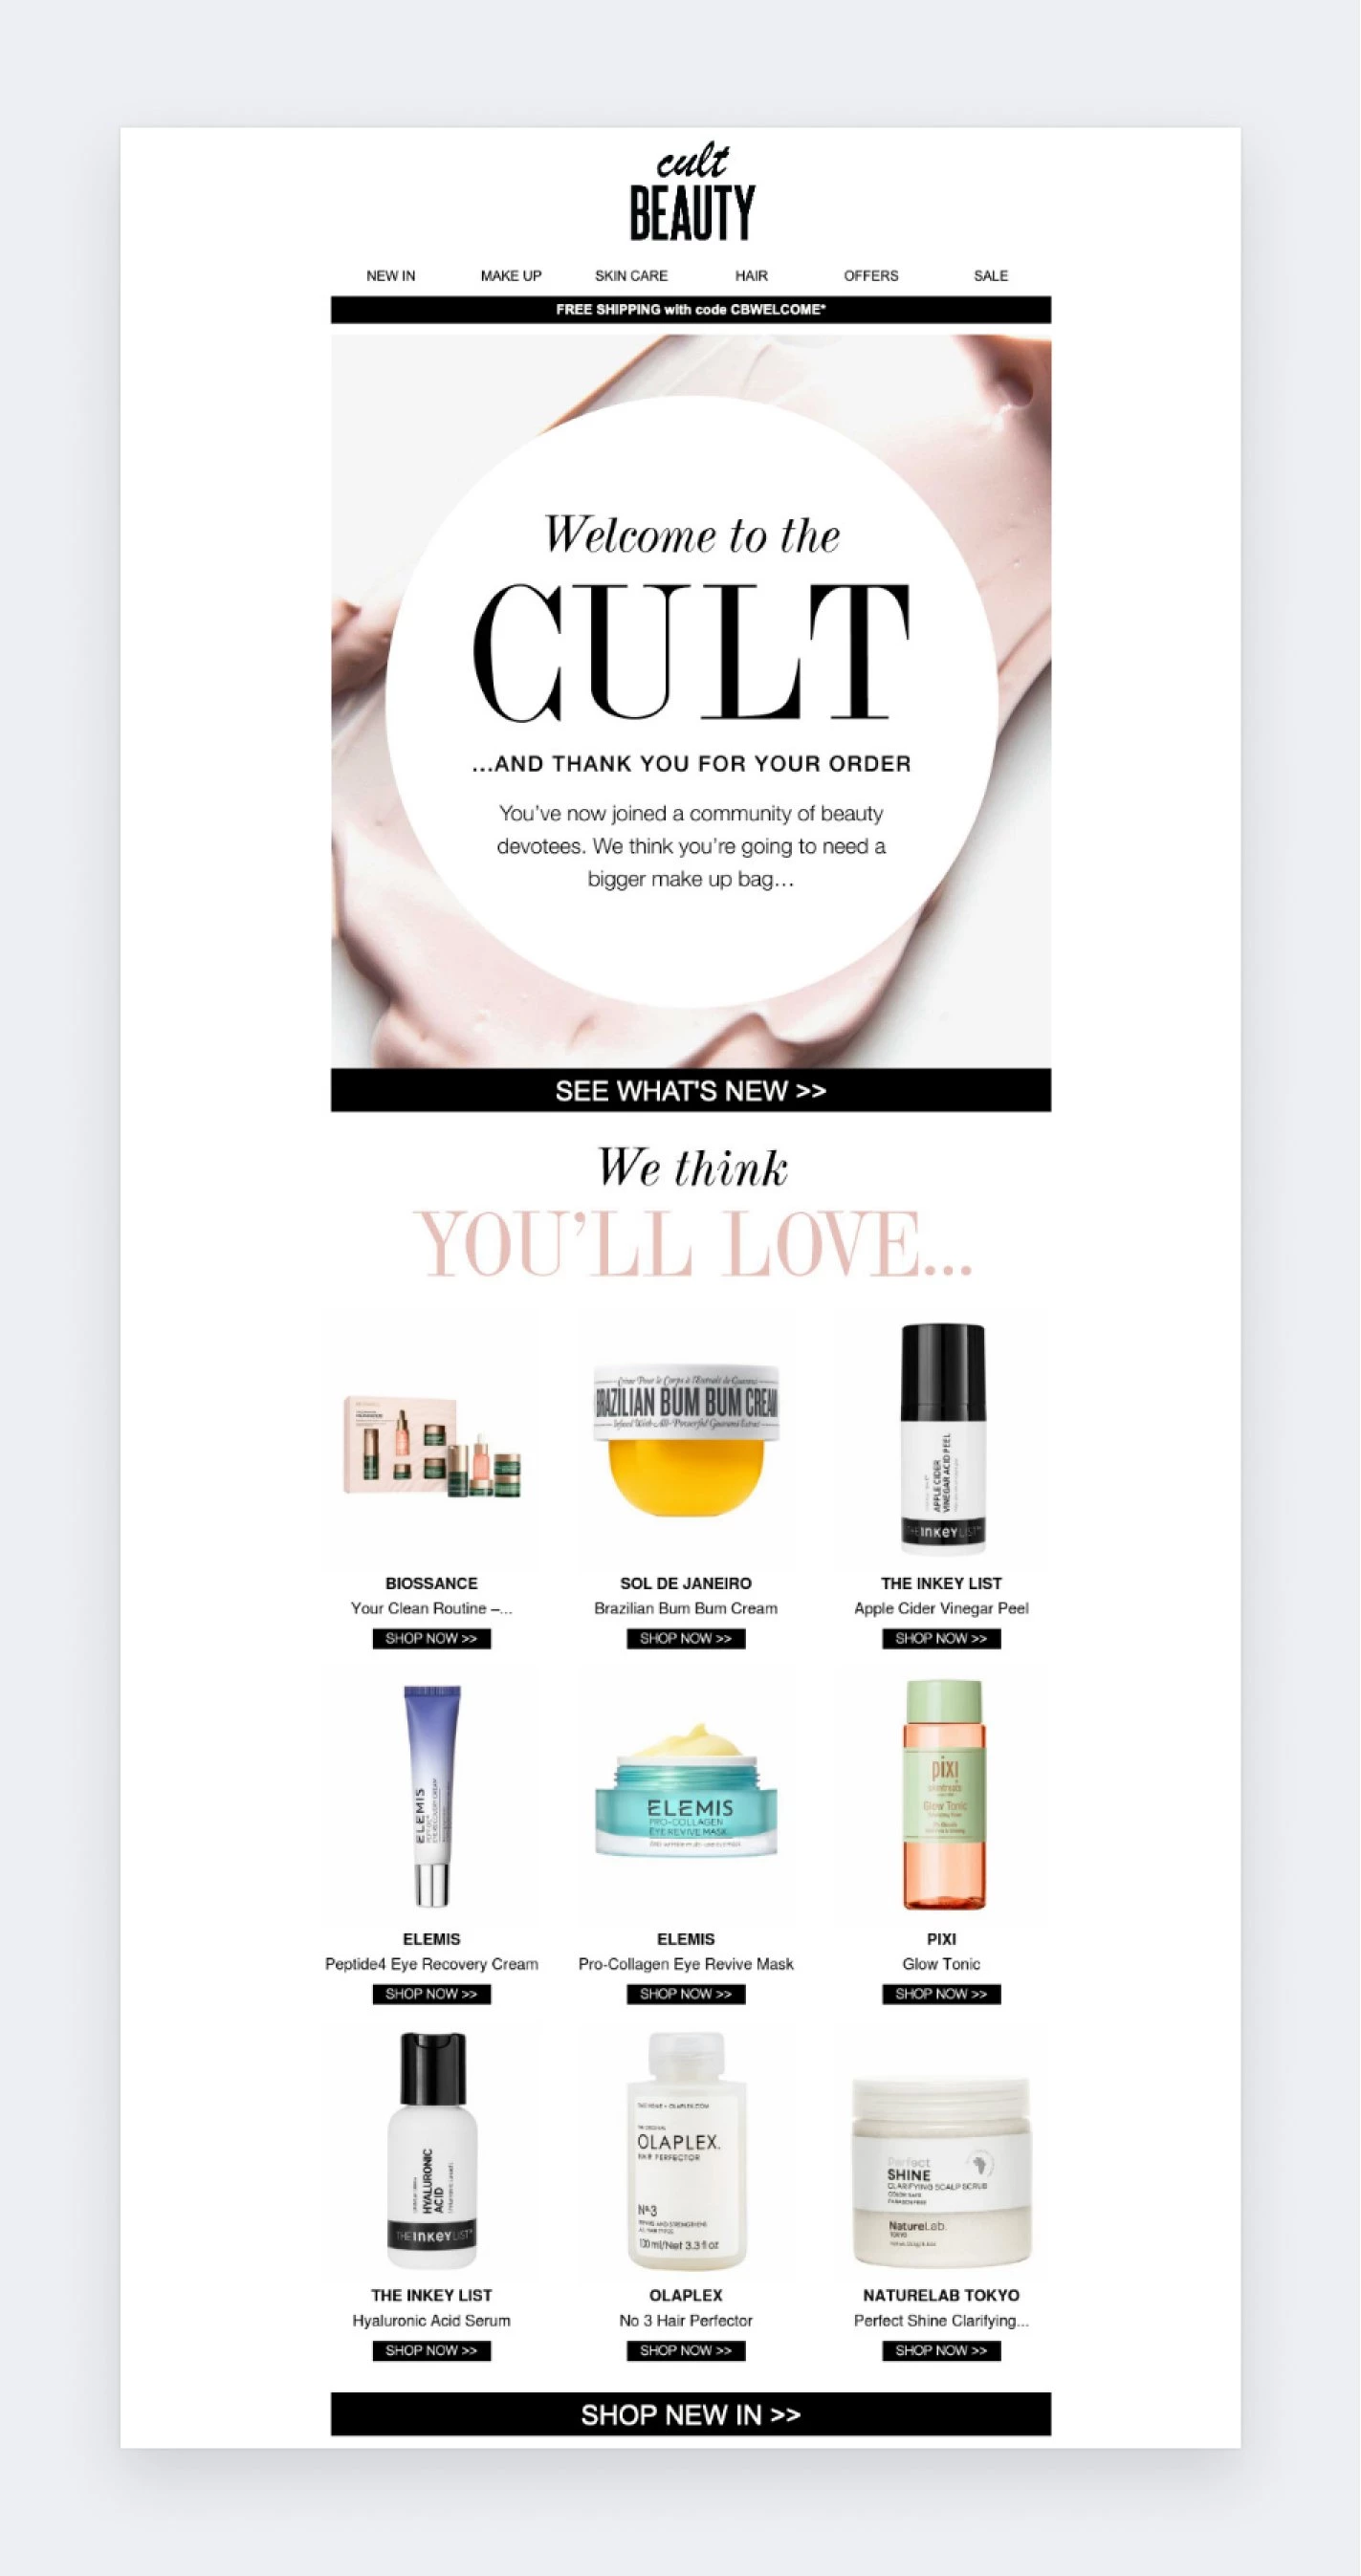 Welcome email example - Cult beauty product recommendation creams